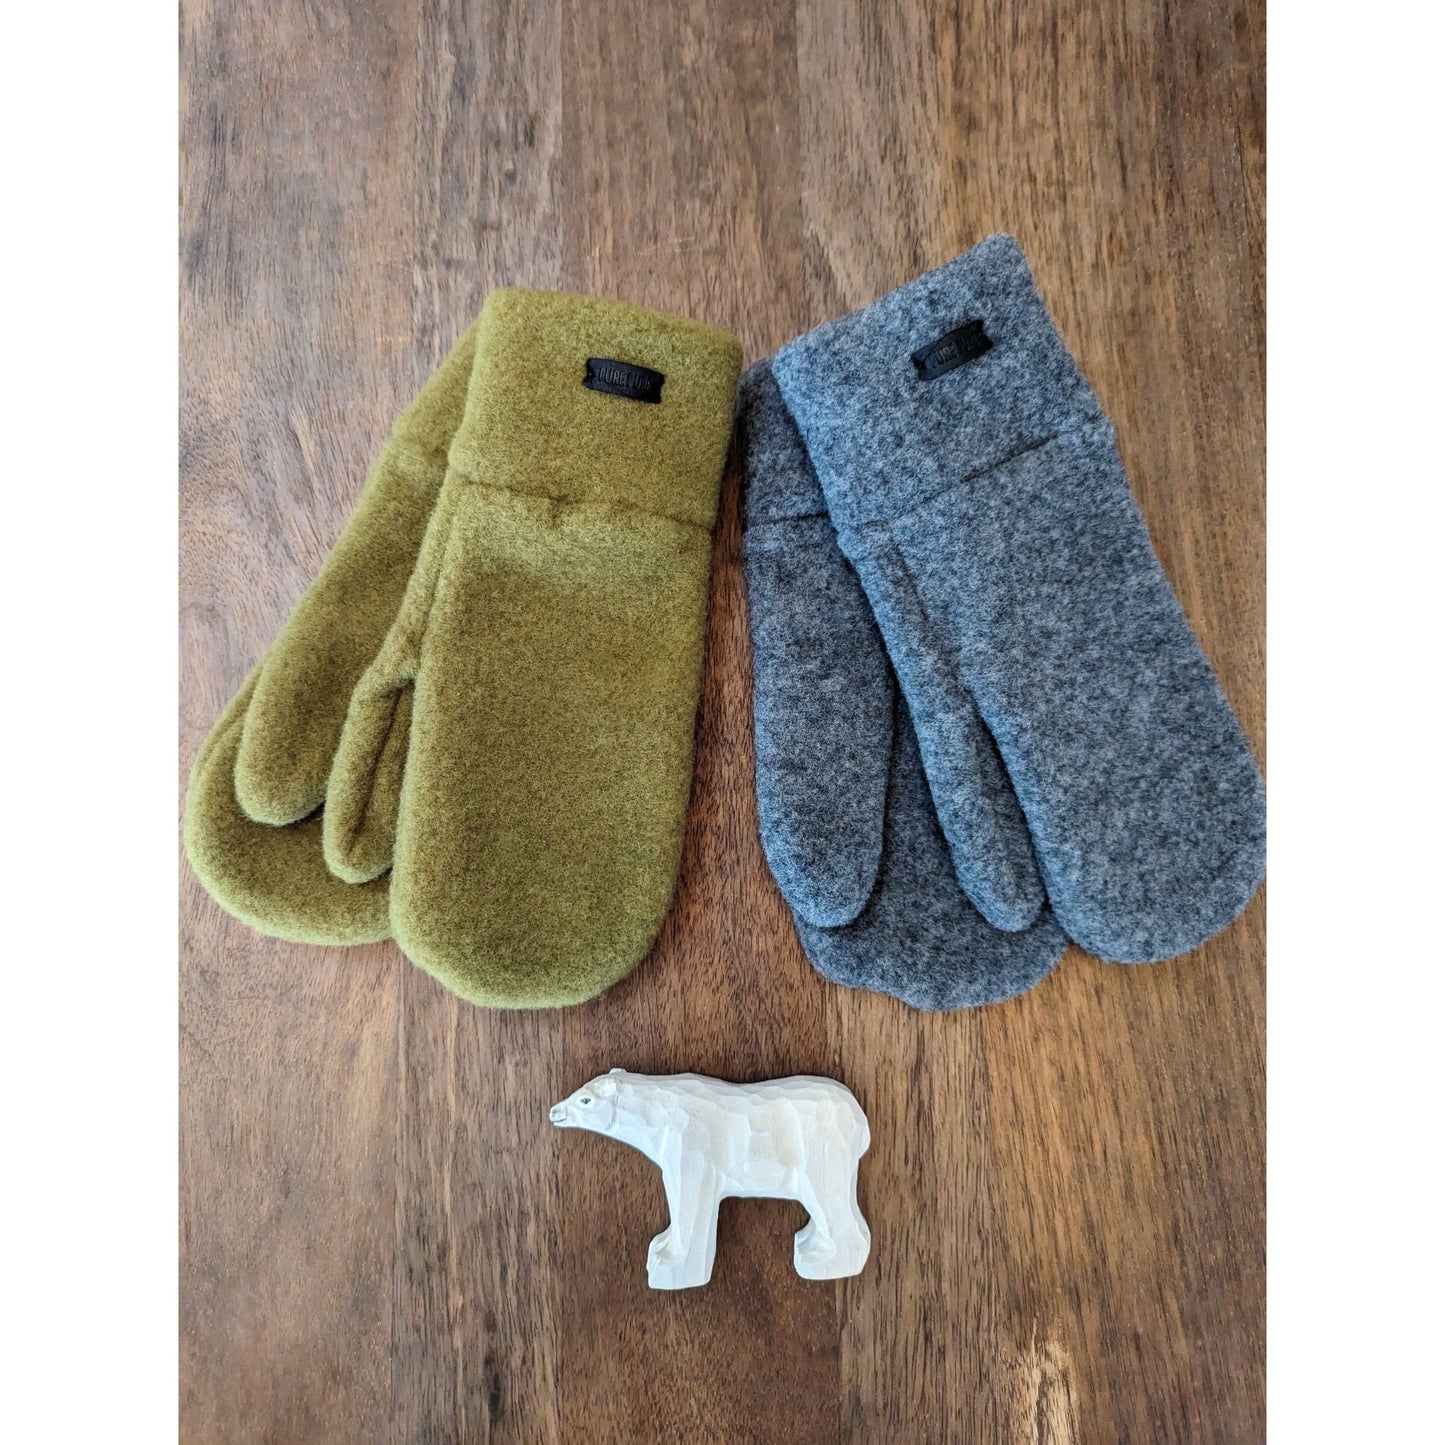 Pure Pure - Organic Wool Fleece Mittens for Adults - Nature's Wild Child